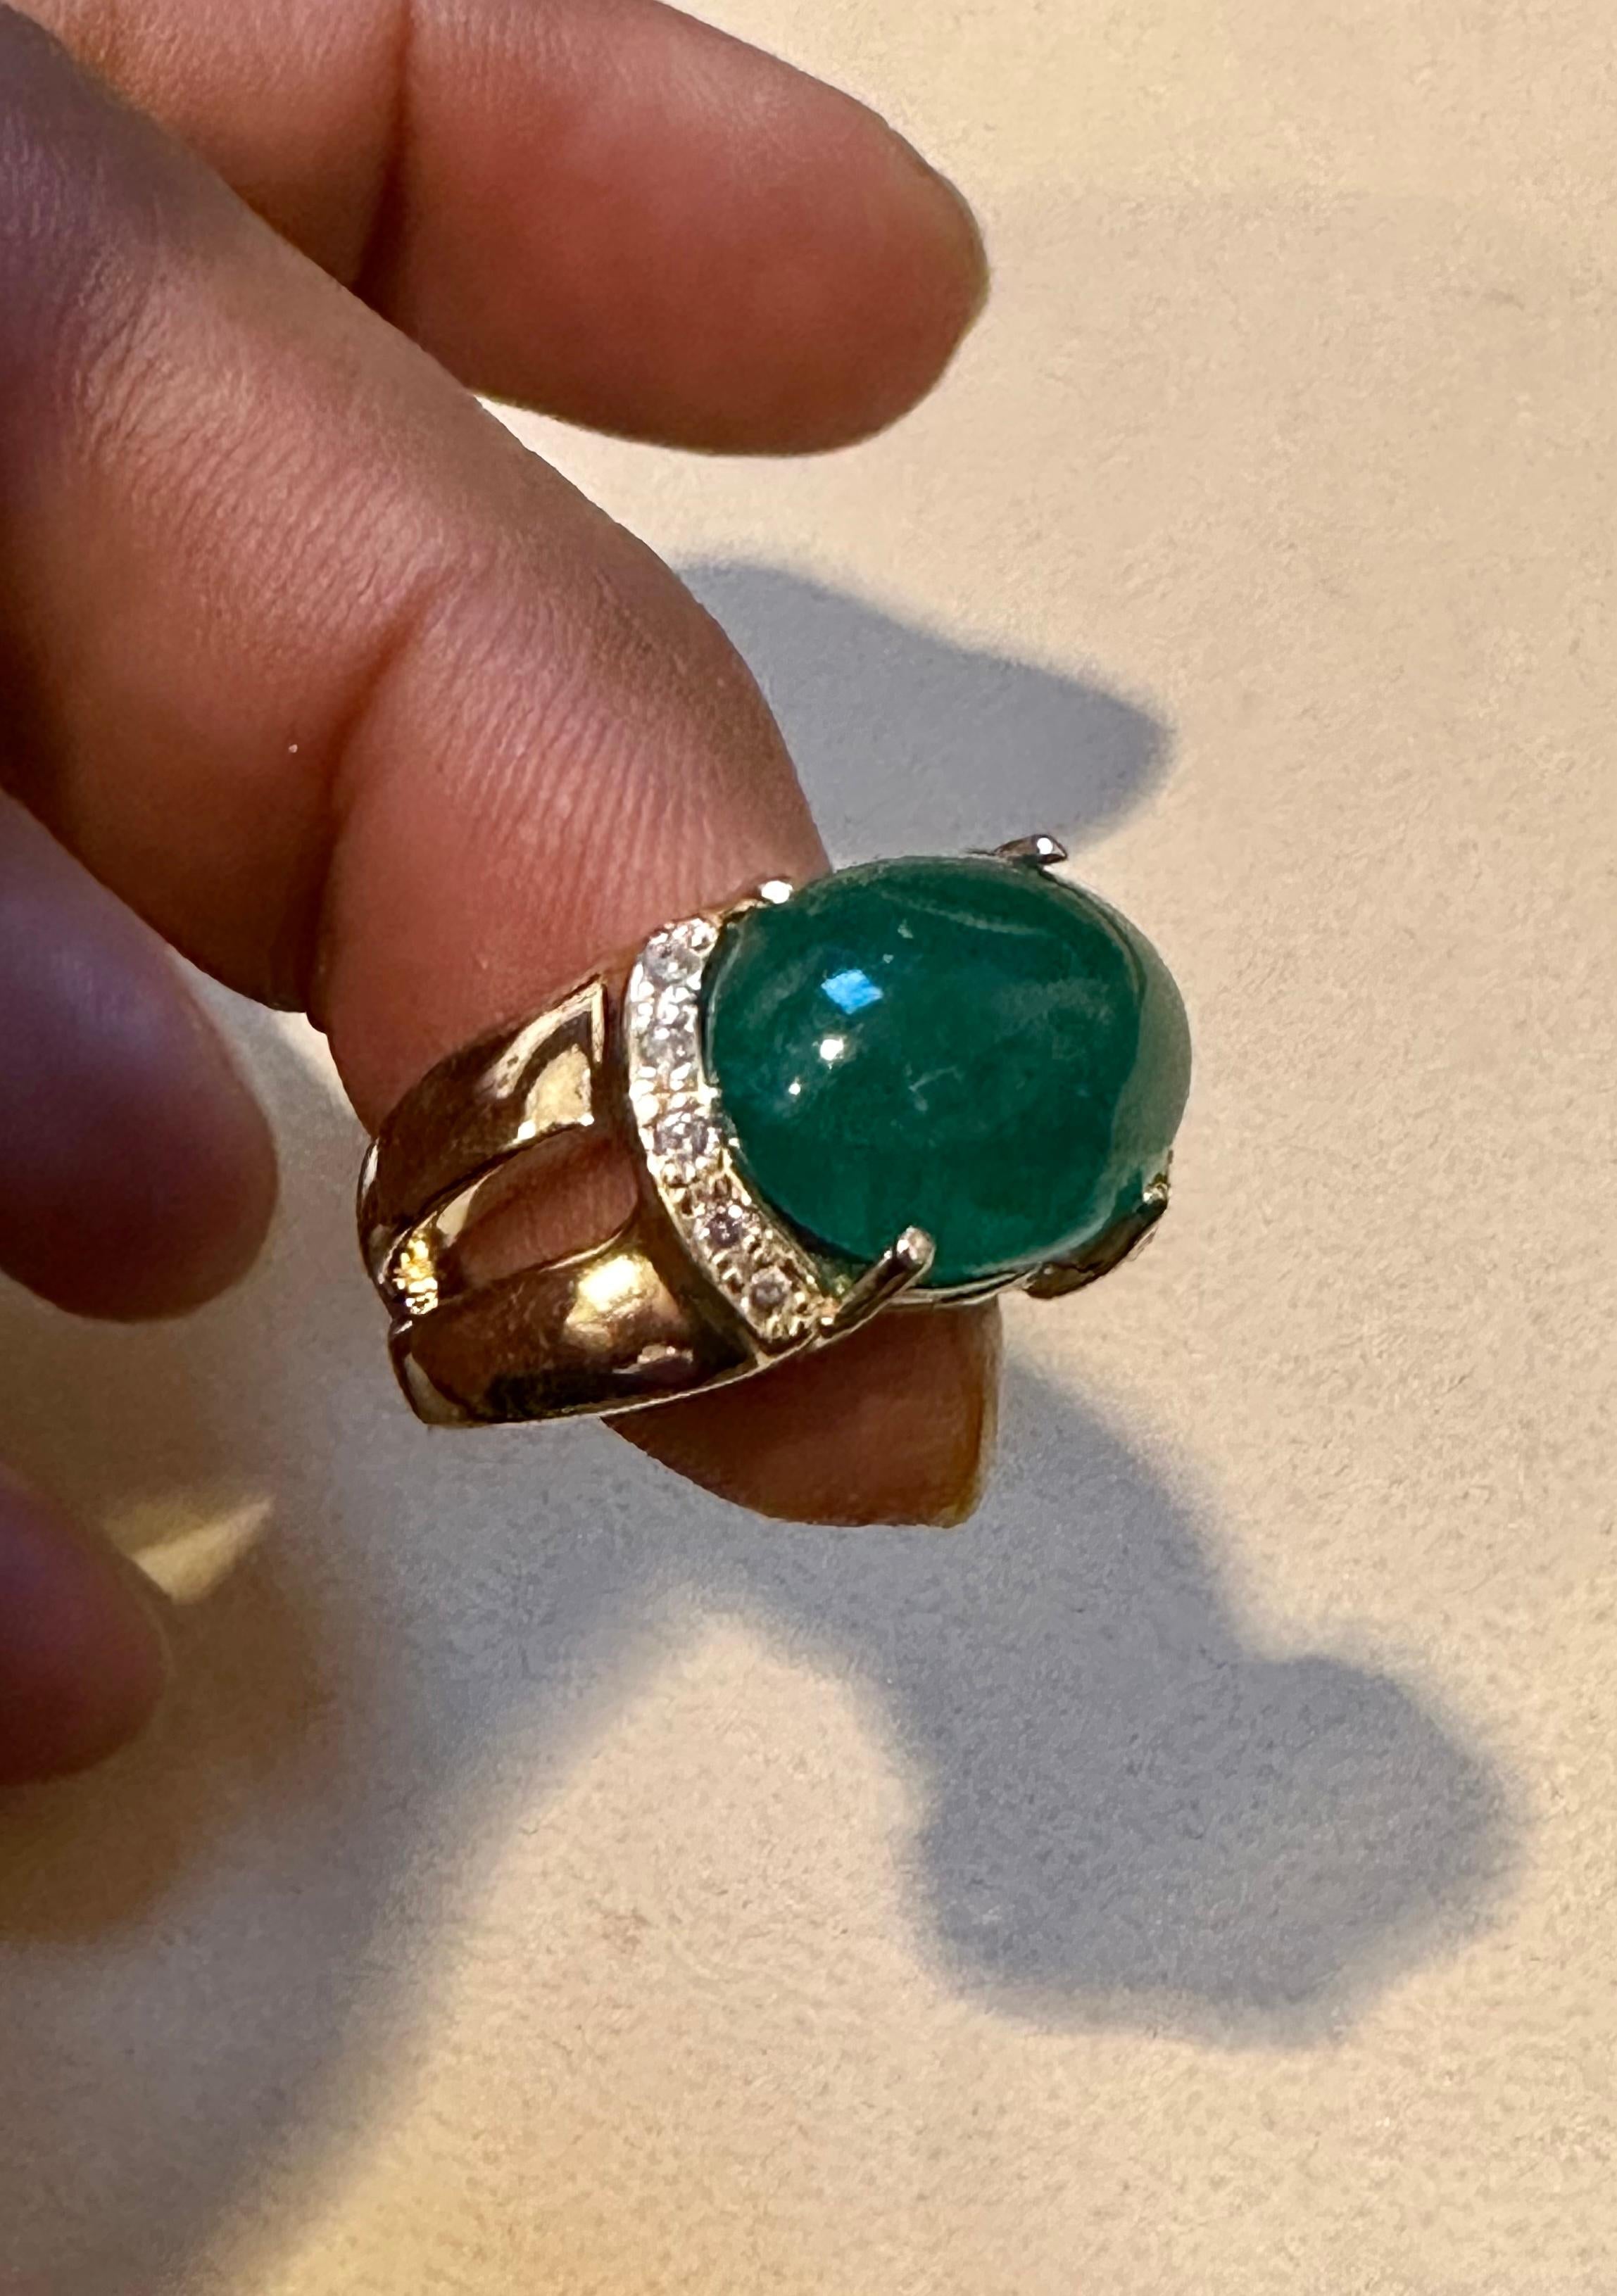 This classic cocktail ring is a stunning piece of jewelry that features a 4.5 carat natural emerald cabochon with two side rows of tiny diamonds. The estate piece has not undergone any color enhancement and is made of 14 karat yellow gold, stamped